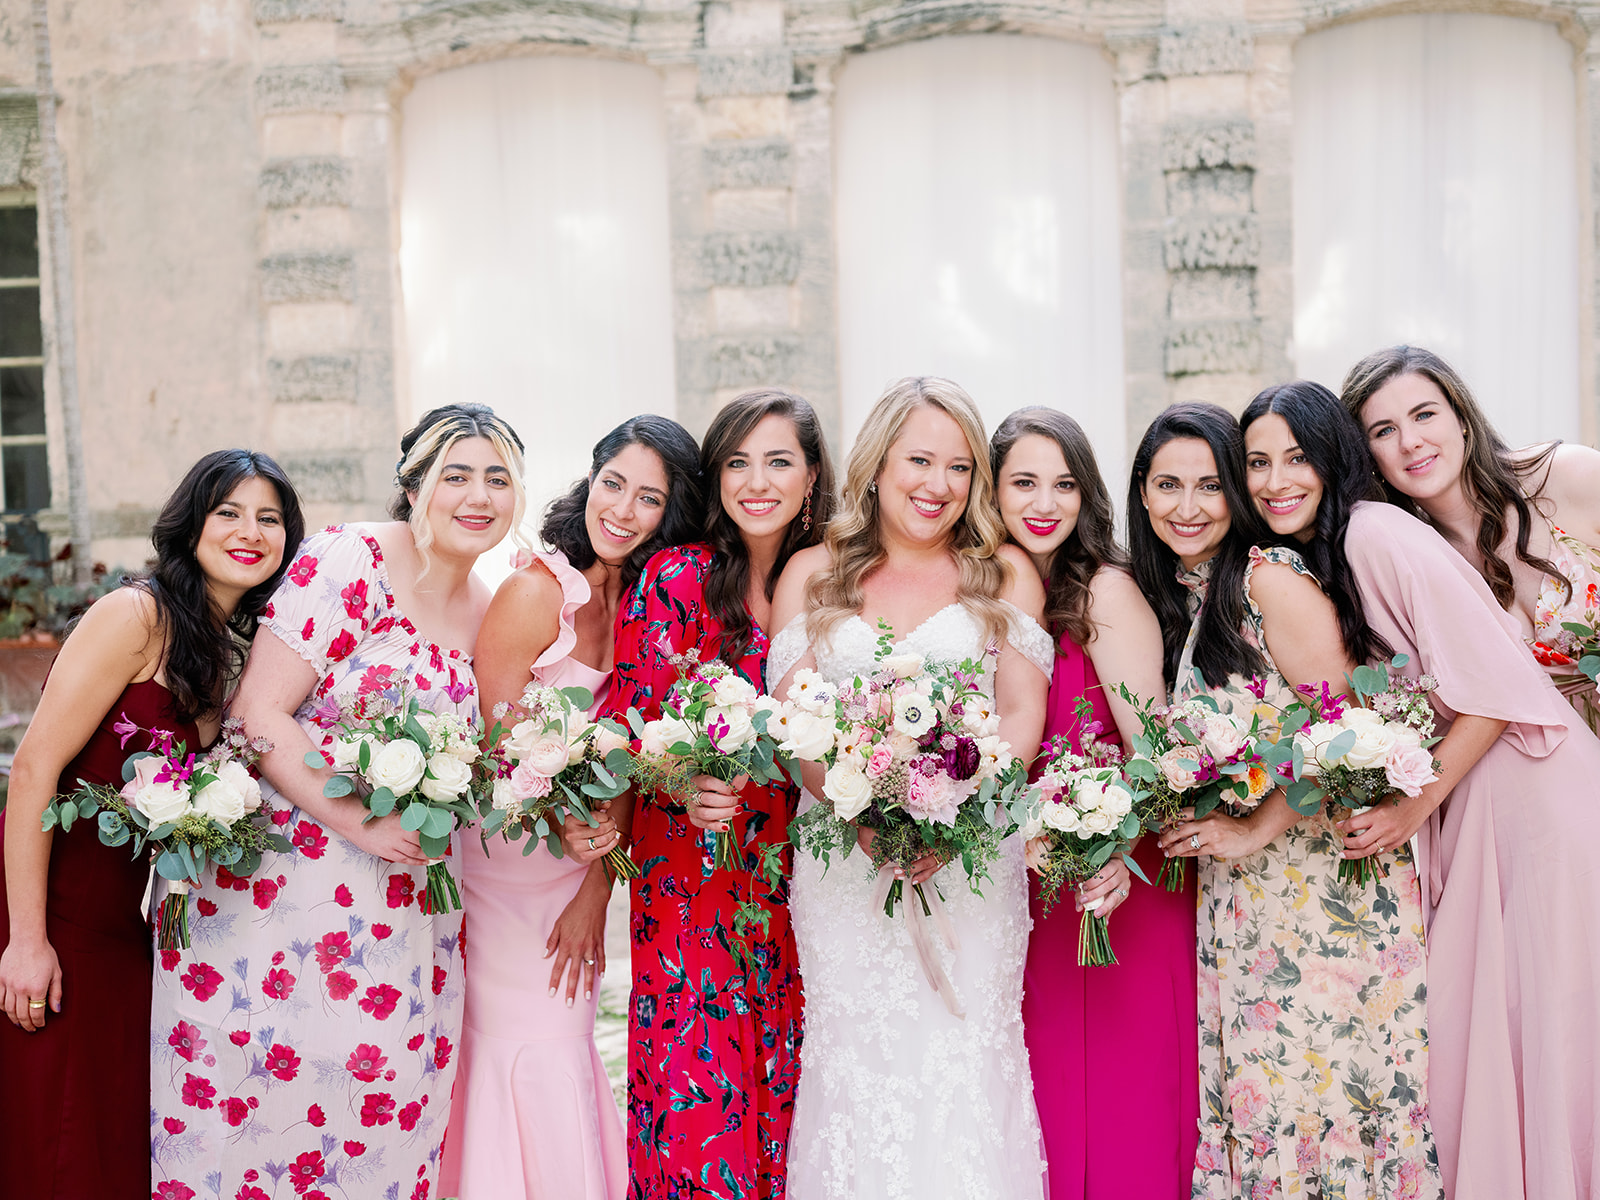 Miami wedding with pink mismatched bridesmaid dresses.